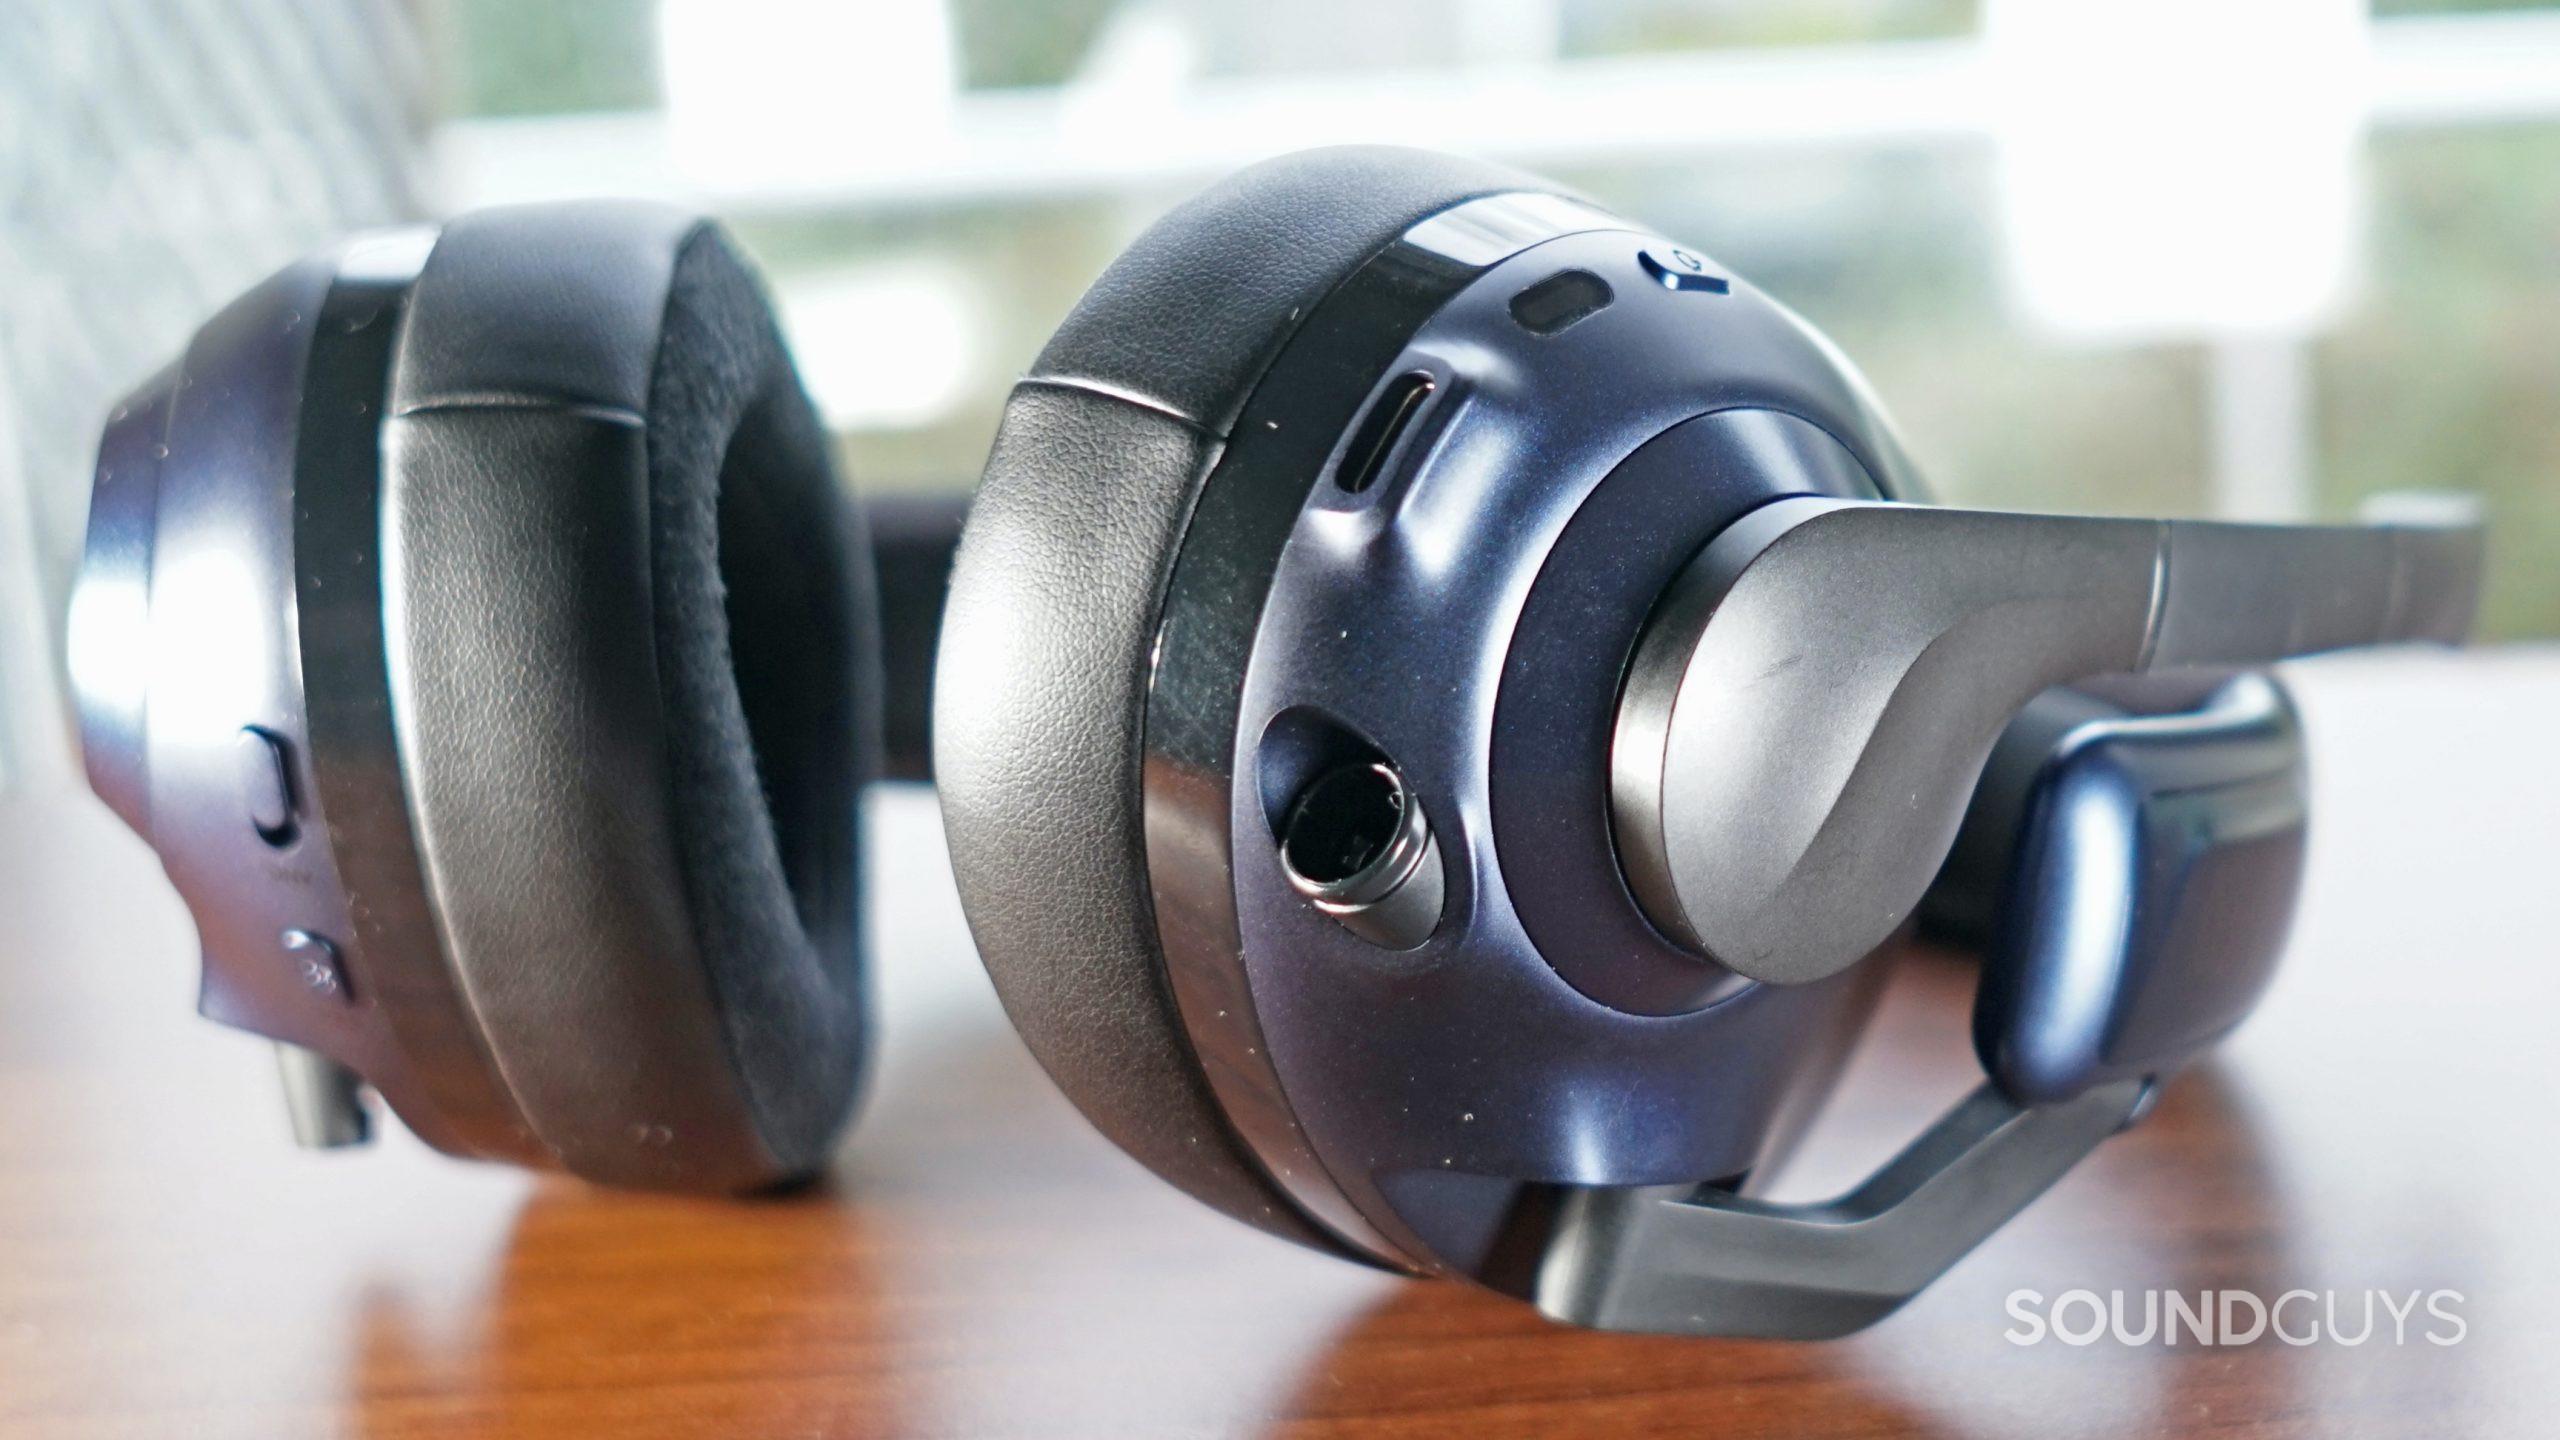 A close up of the EPOS H3PRO Hybrid gaming headset's left headphone, which shows the power button, microphone, USB-C port, and 2.5mm connection port.